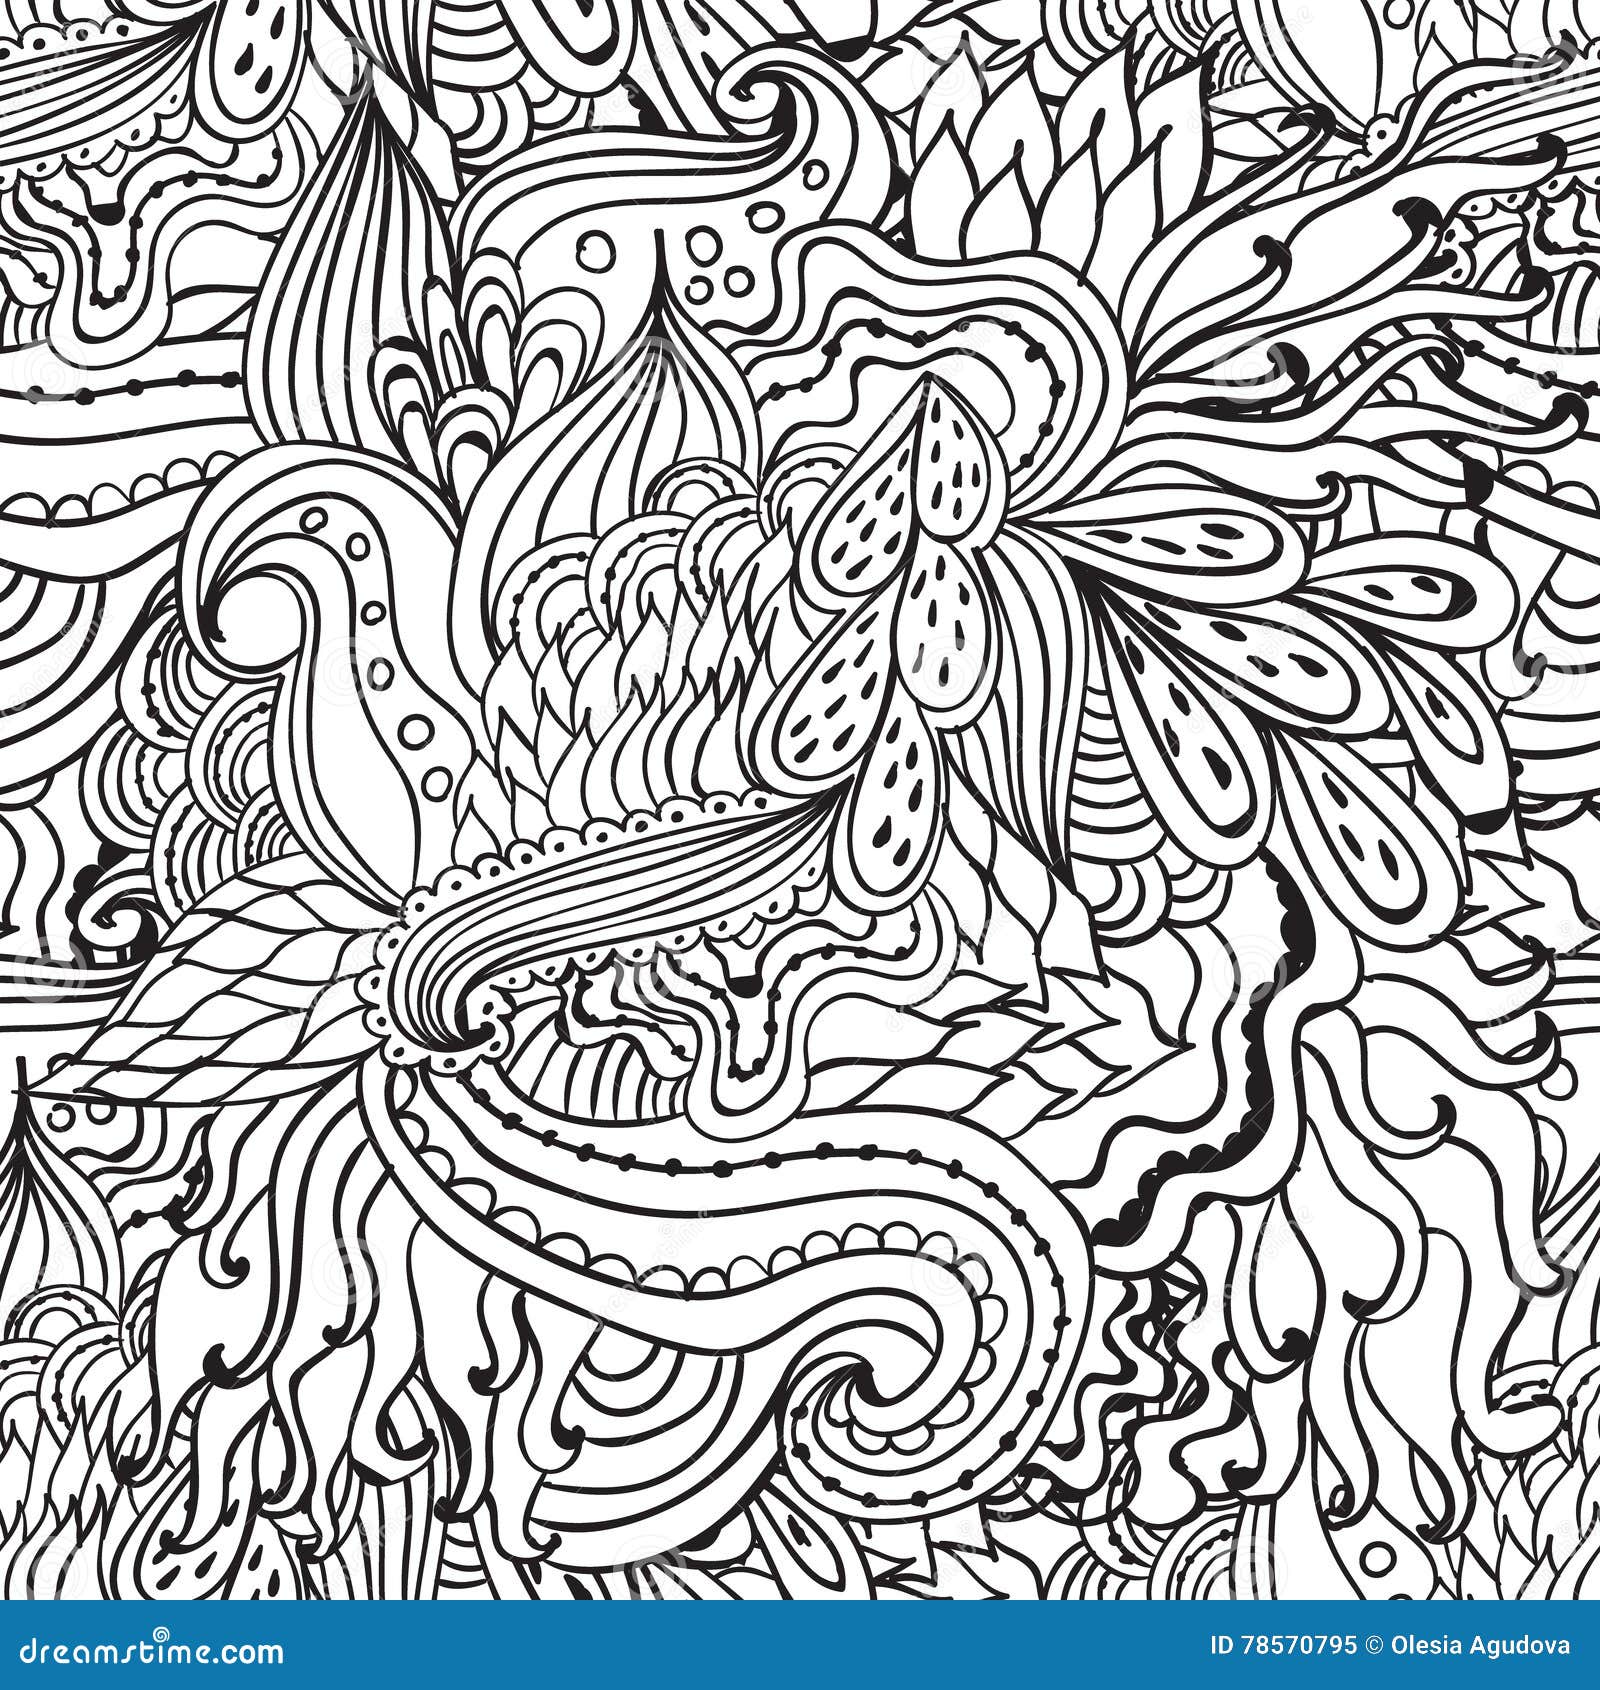 Coloring Pages for Adults.Decorative Hand Drawn Doodle Nature ...